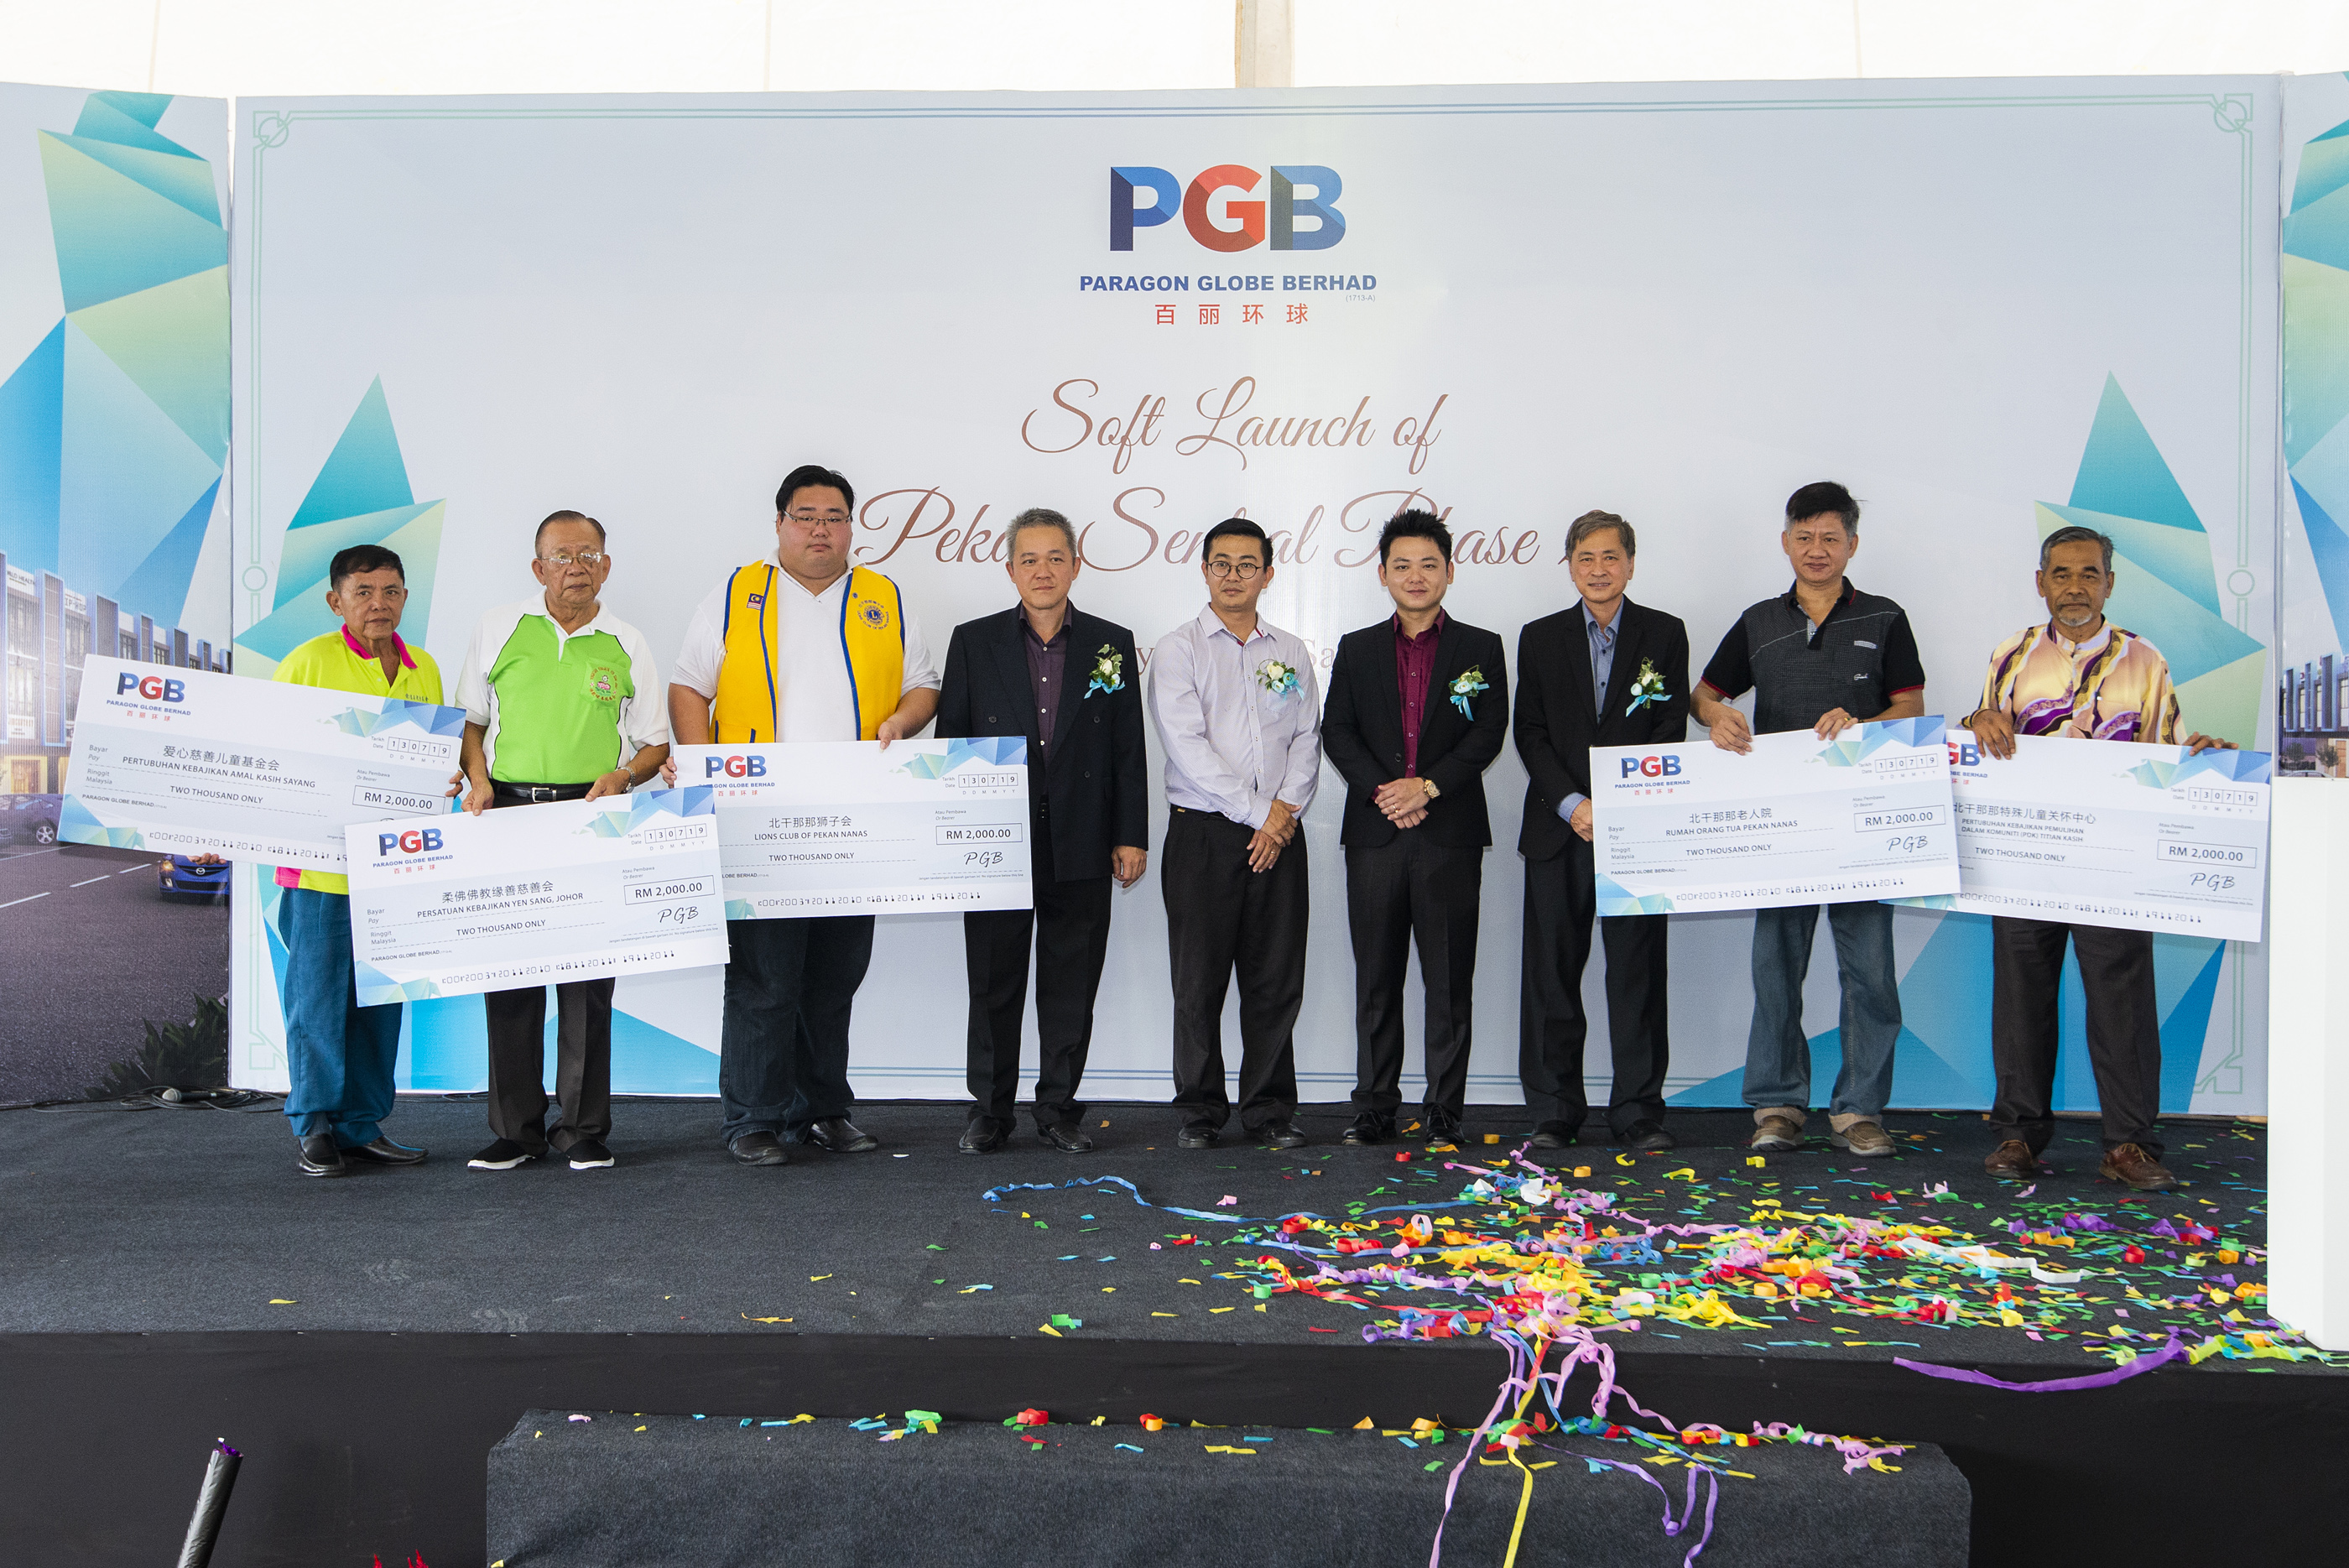 Paragon Globe Berhad is also playing its part as a good corporate citizen by contributing RM10,000 to 5 non-profit organization, with RM2000.00 per each.